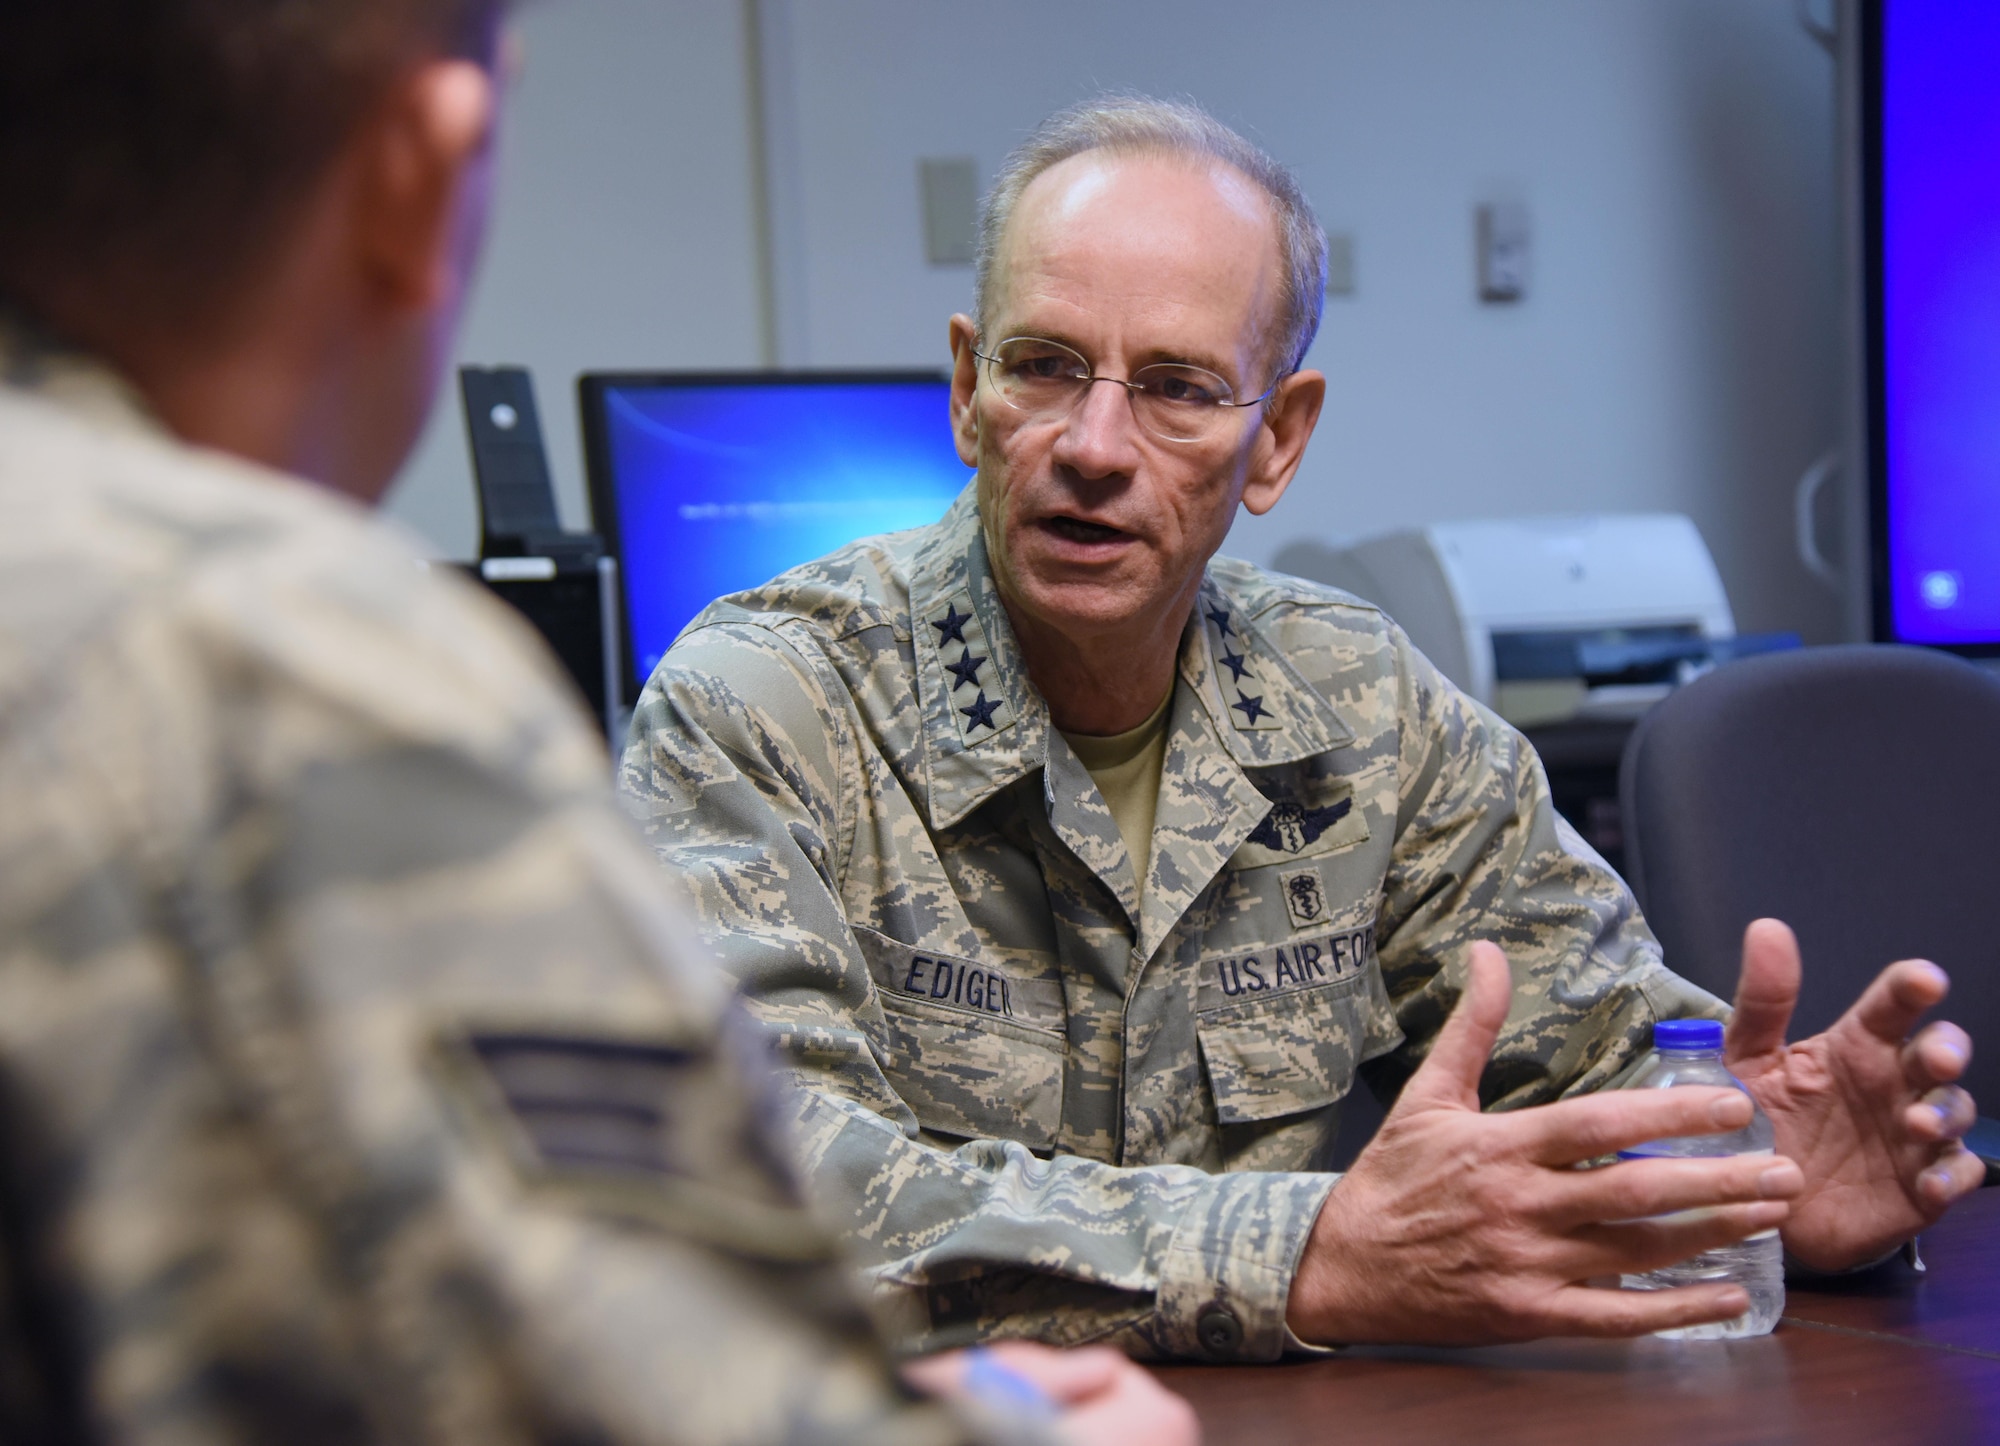 Lt. Gen. Mark Ediger, Air Force Surgeon General, speaks with Airmen during a visit to the Clinical Research Lab, Oct. 17, 2017, on Keesler Air Force Base, Mississippi. Ediger retires from the Air Force, June 1, 2018. (U.S. Air Force photo by Kemberly Groue)